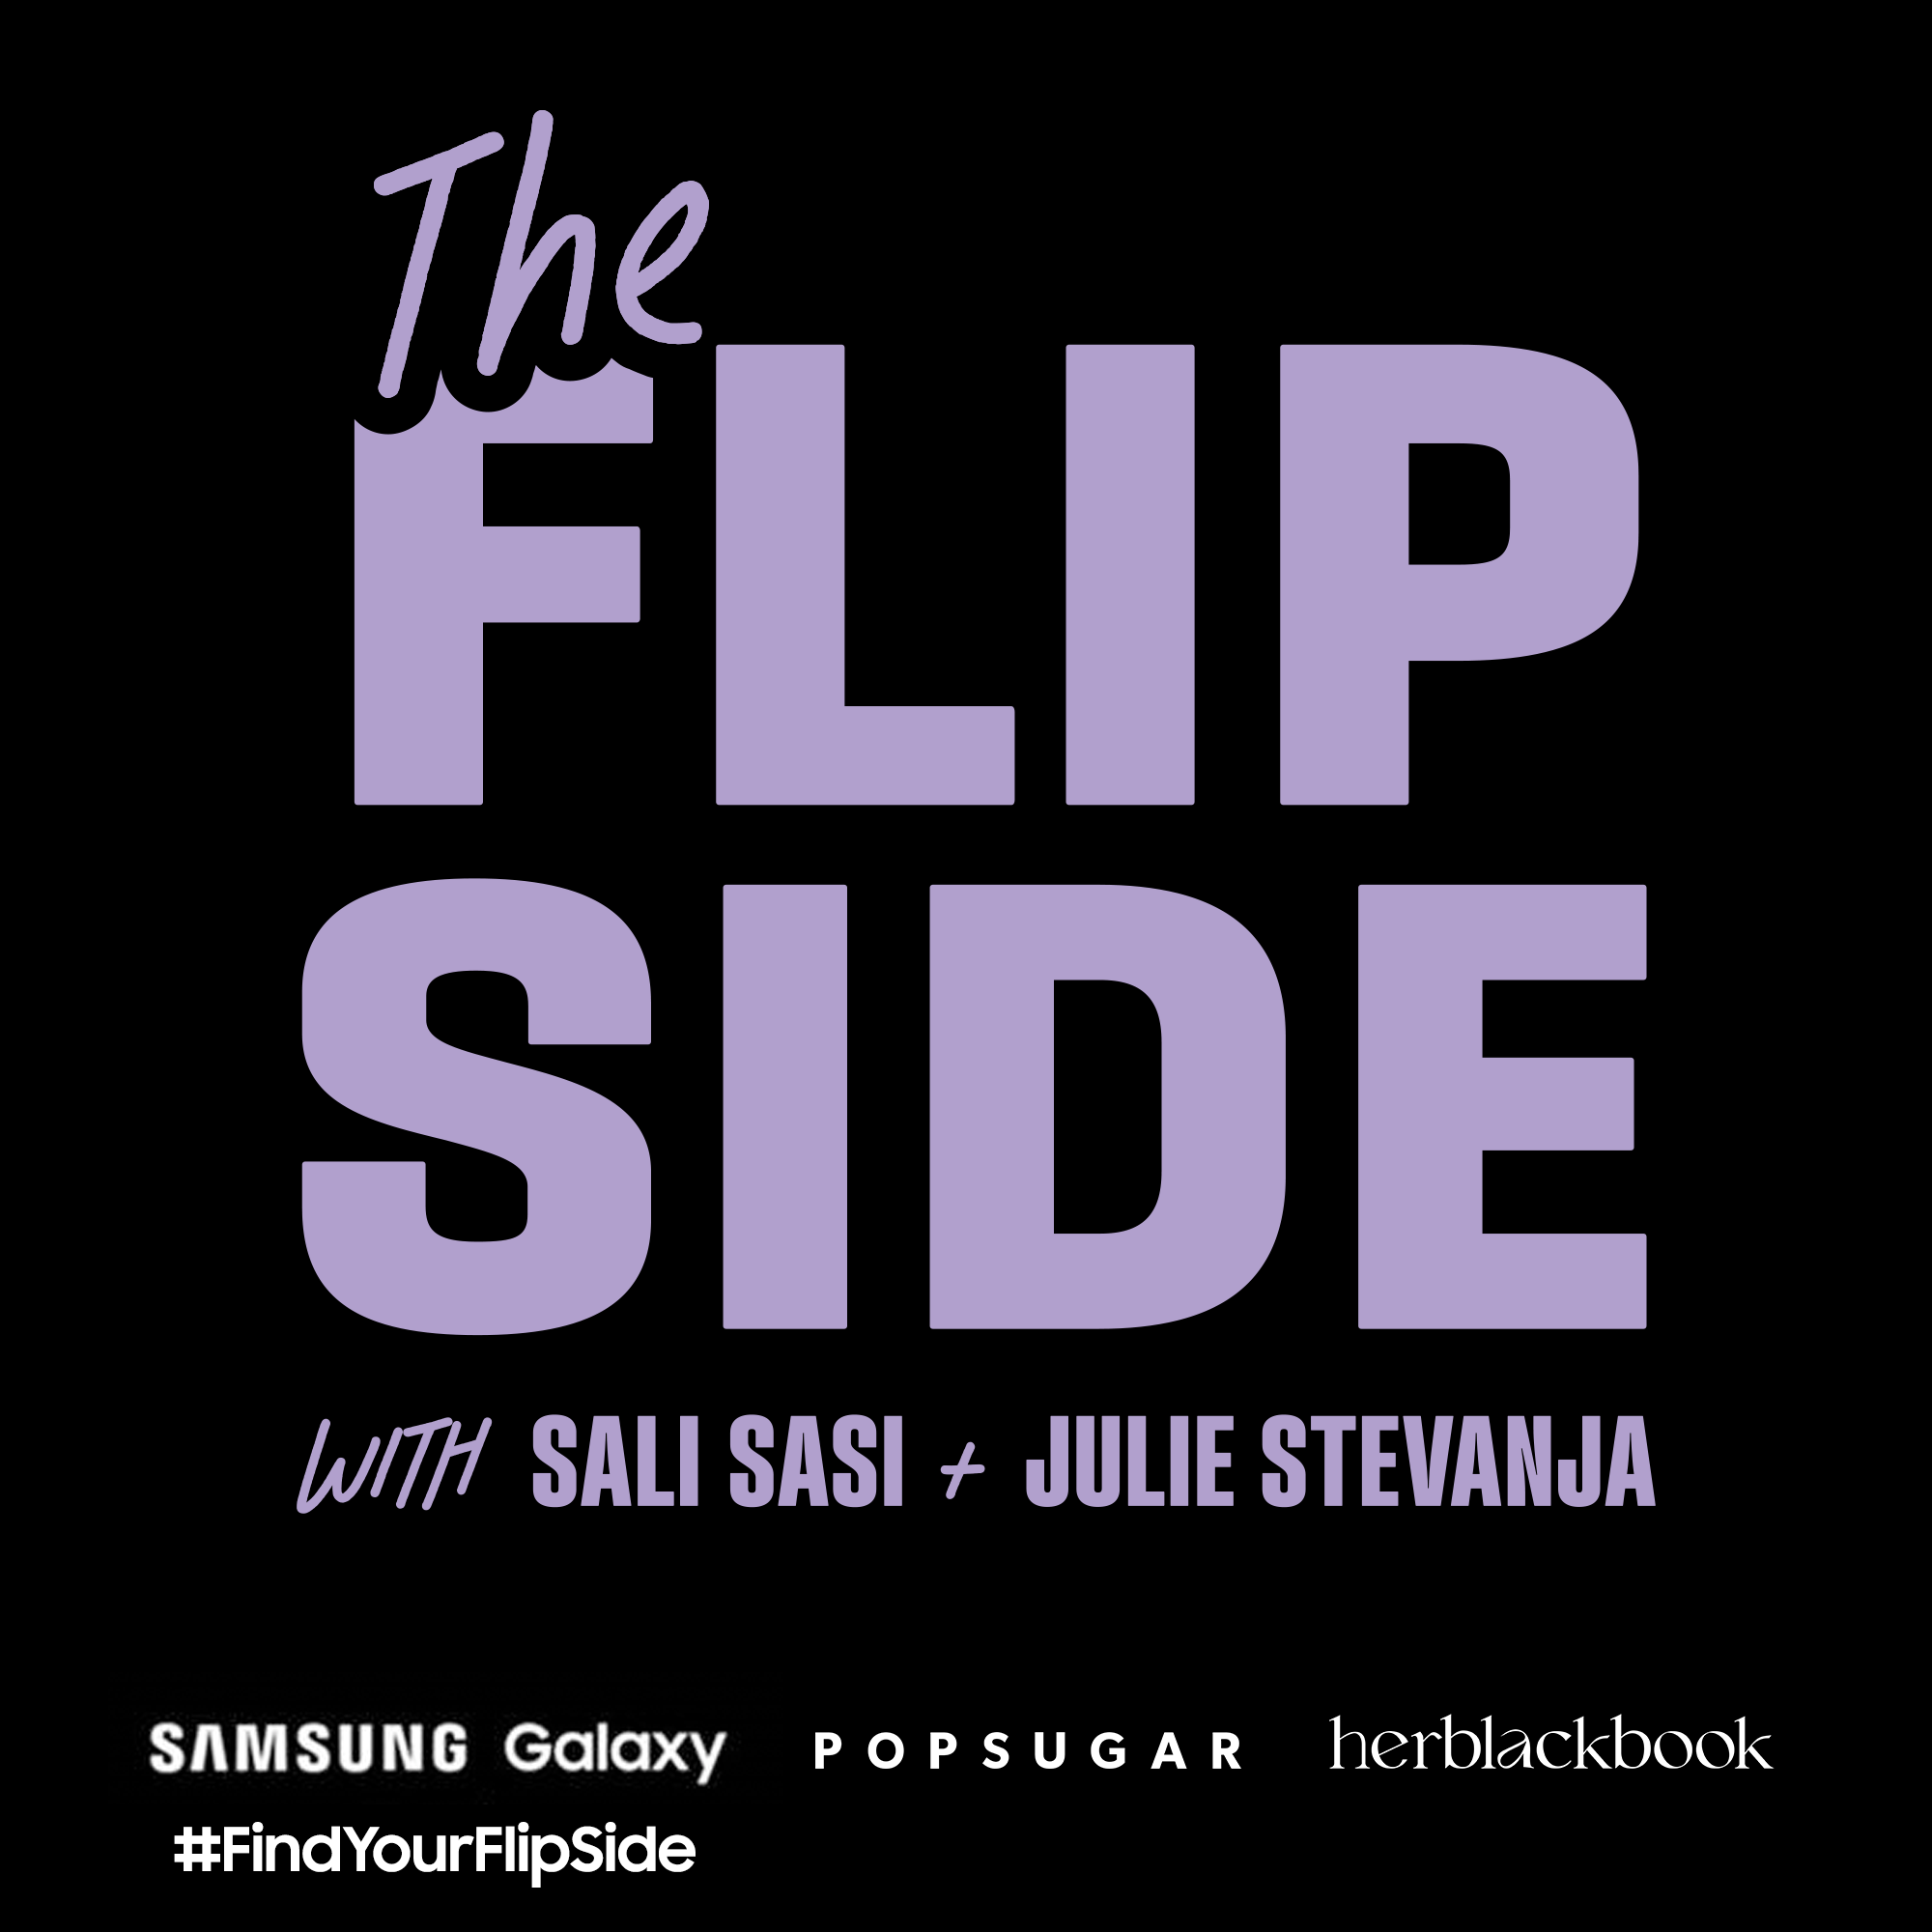 The Flipside, Featuring Lisa Teh